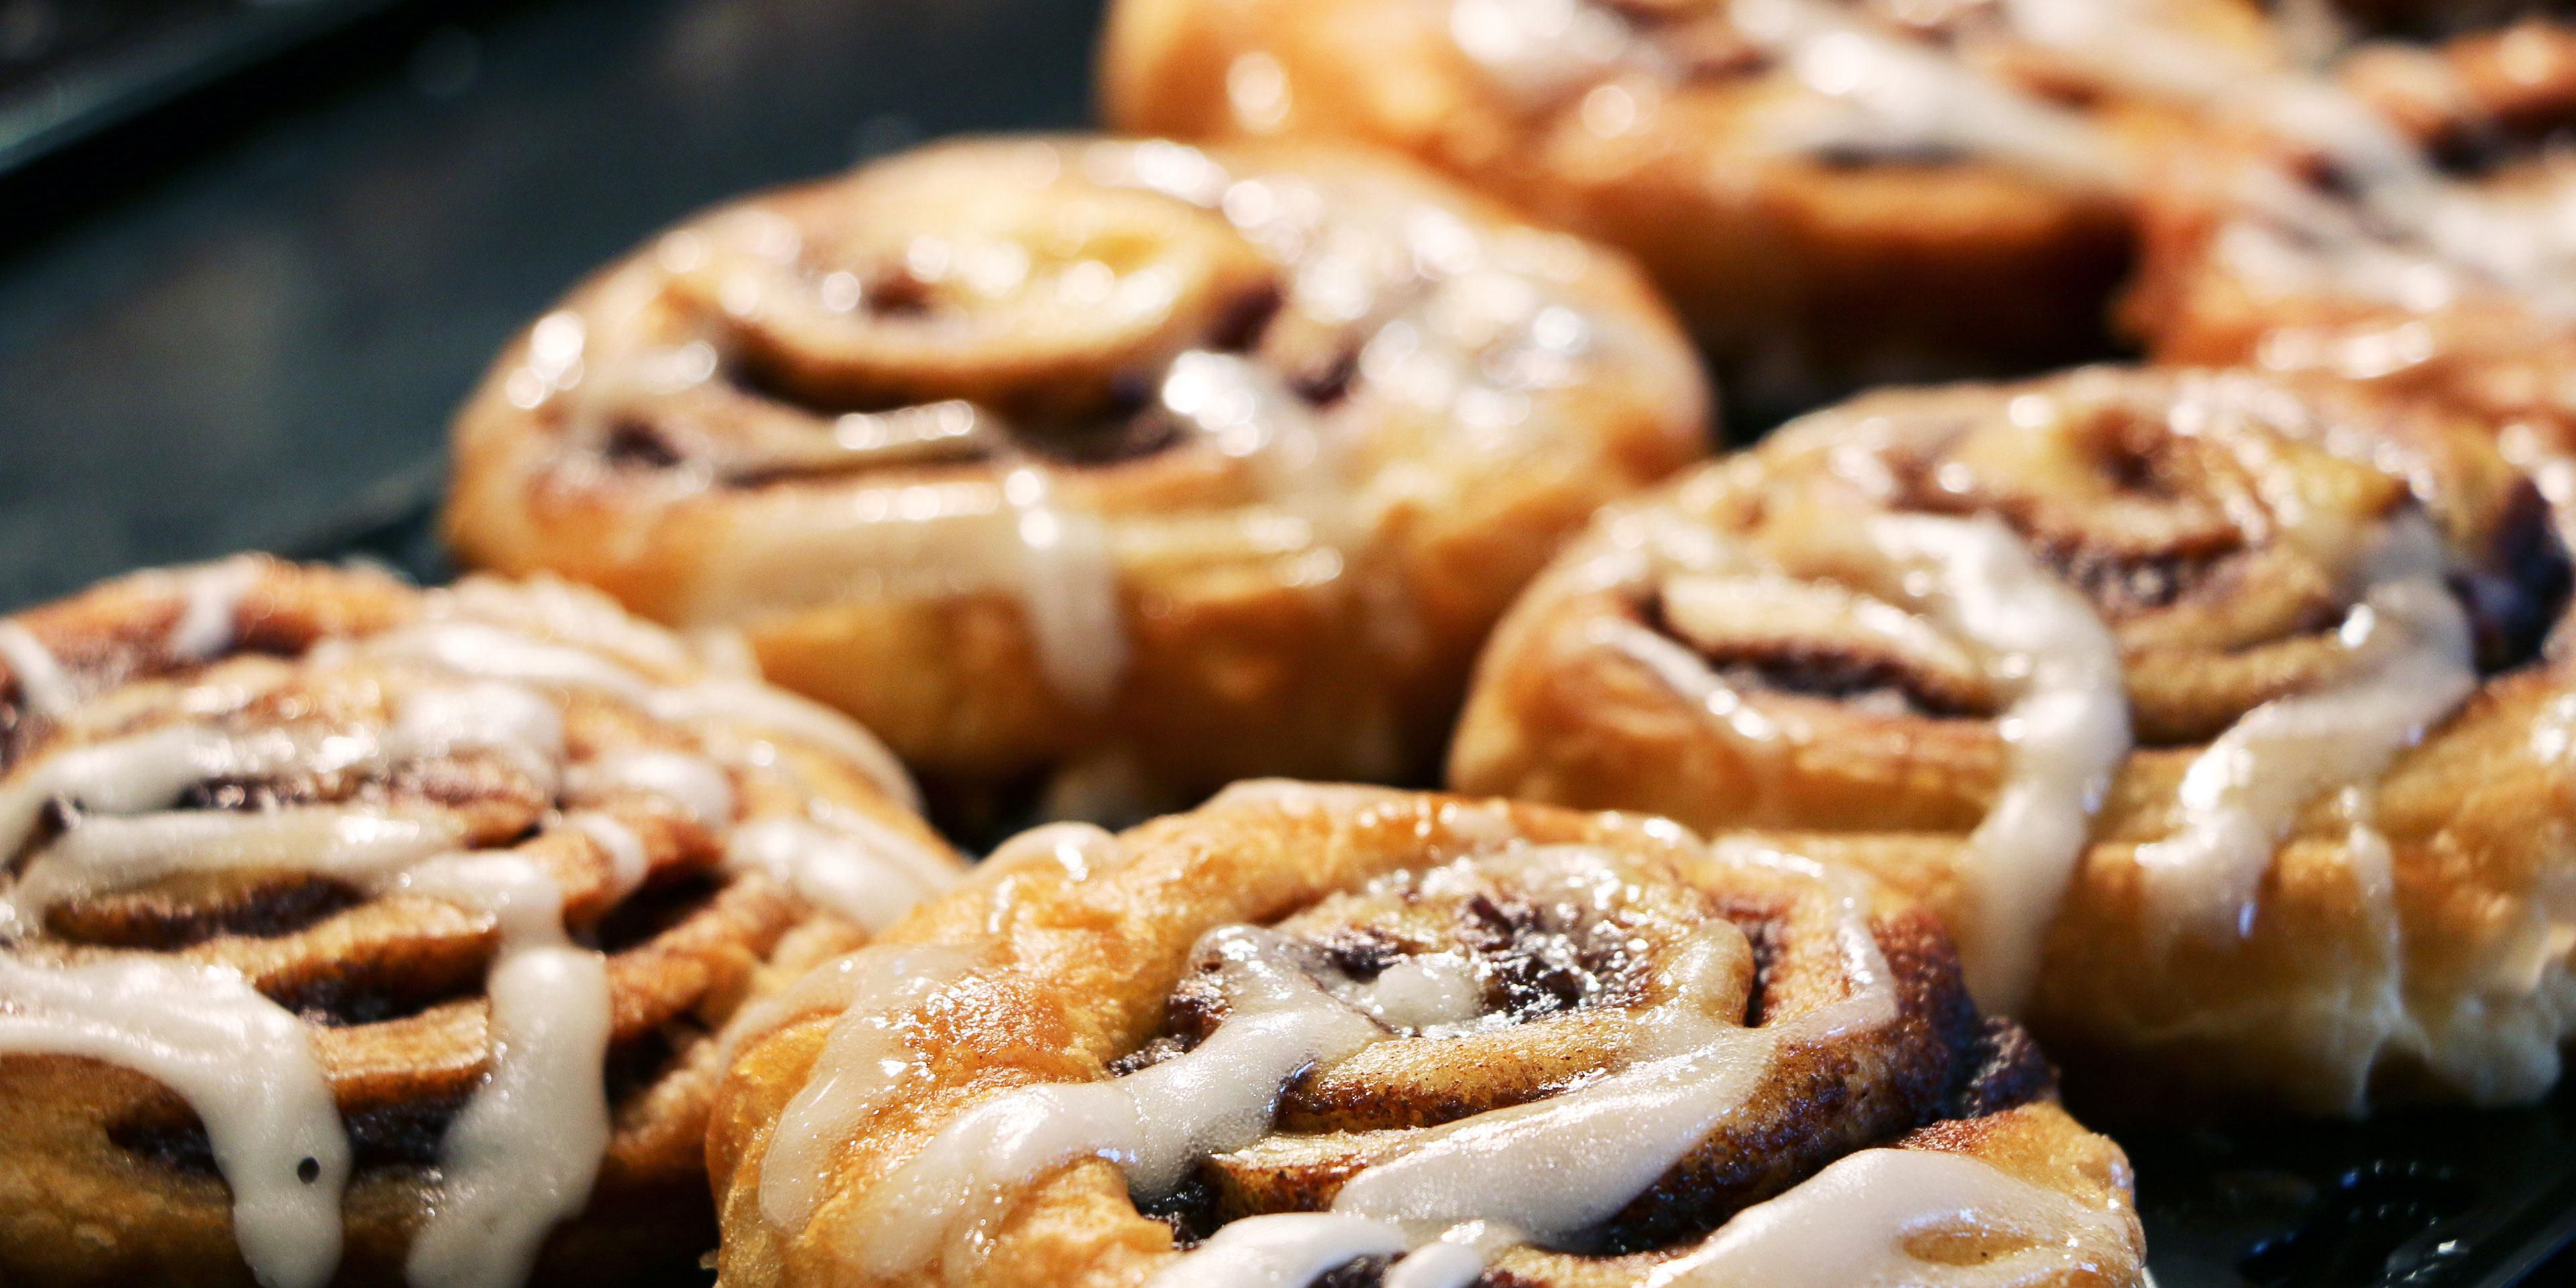 Wake up and enjoy one of our hot, signature cinnamon rolls served each morning at our Express Start breakfast bar at the Holiday Inn Express and Suites Tacoma.